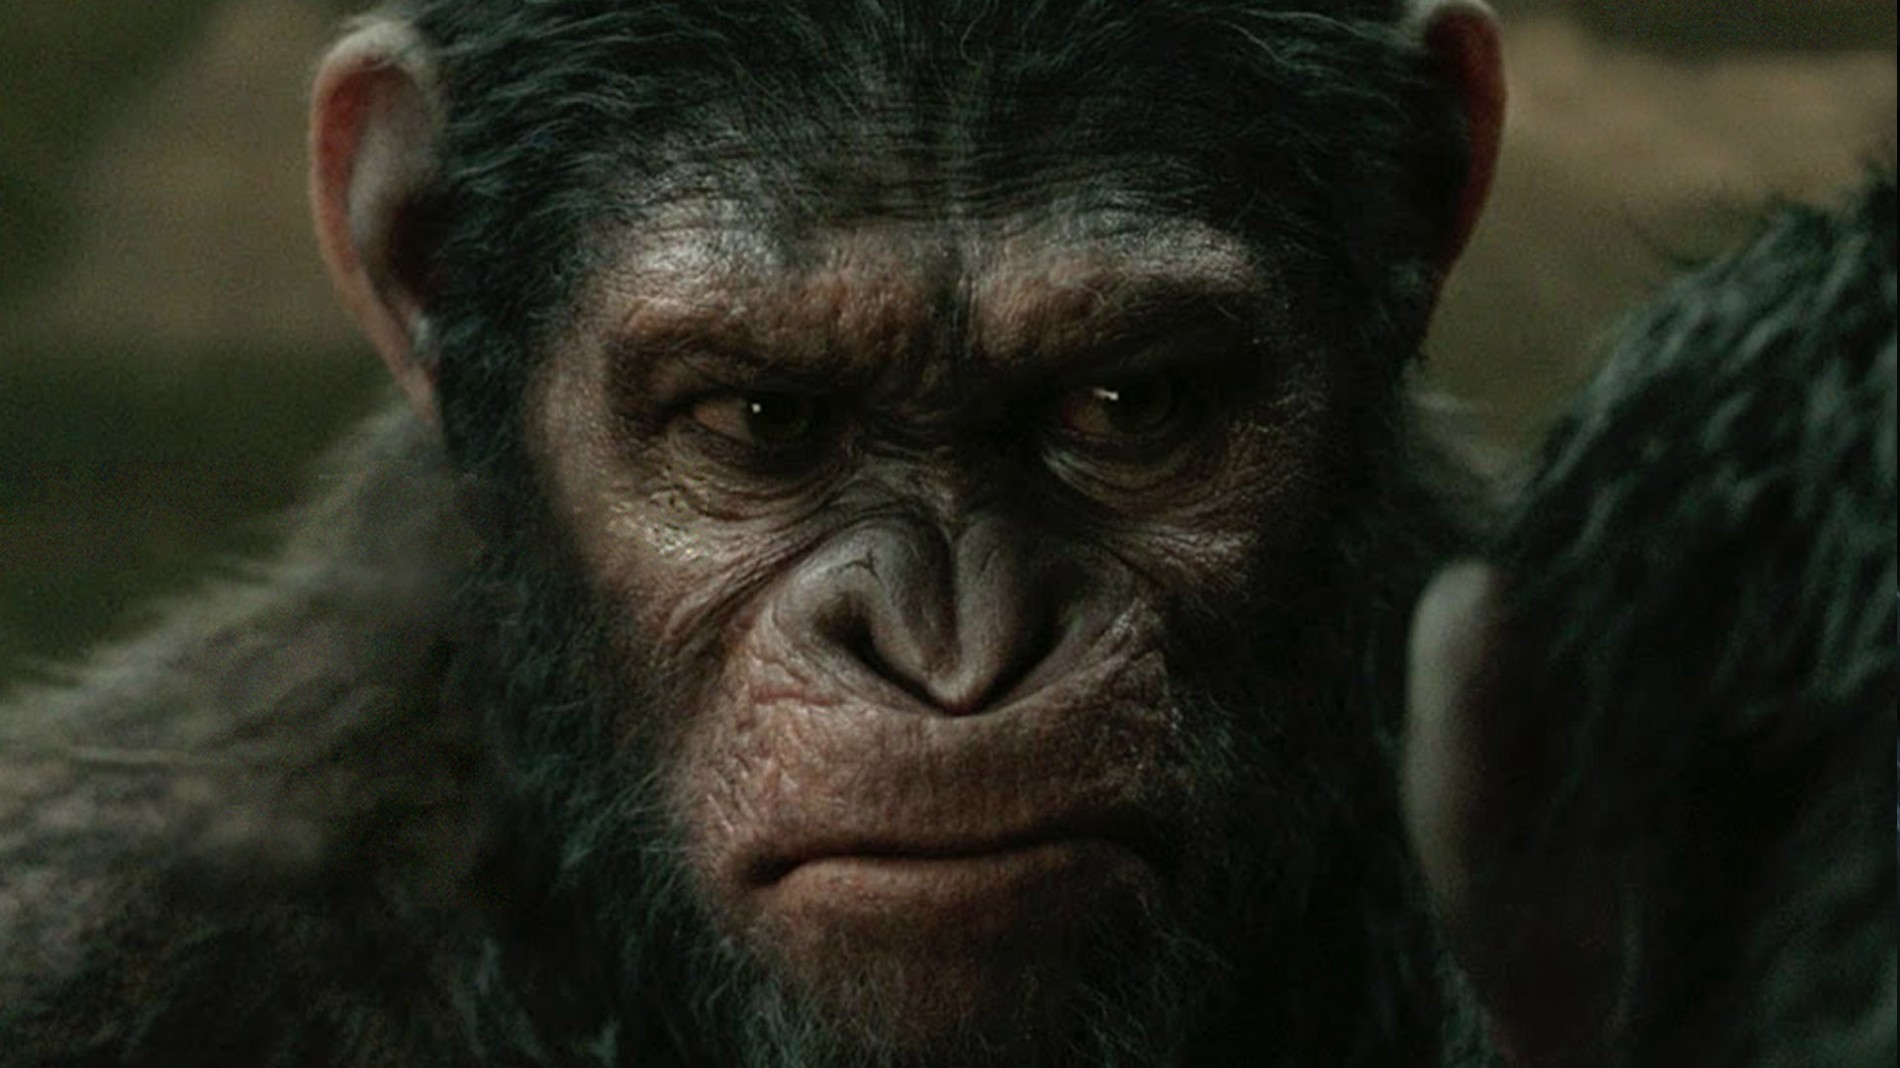 Senior Lighting Technical Director - Dawn of the Planet of the Apes